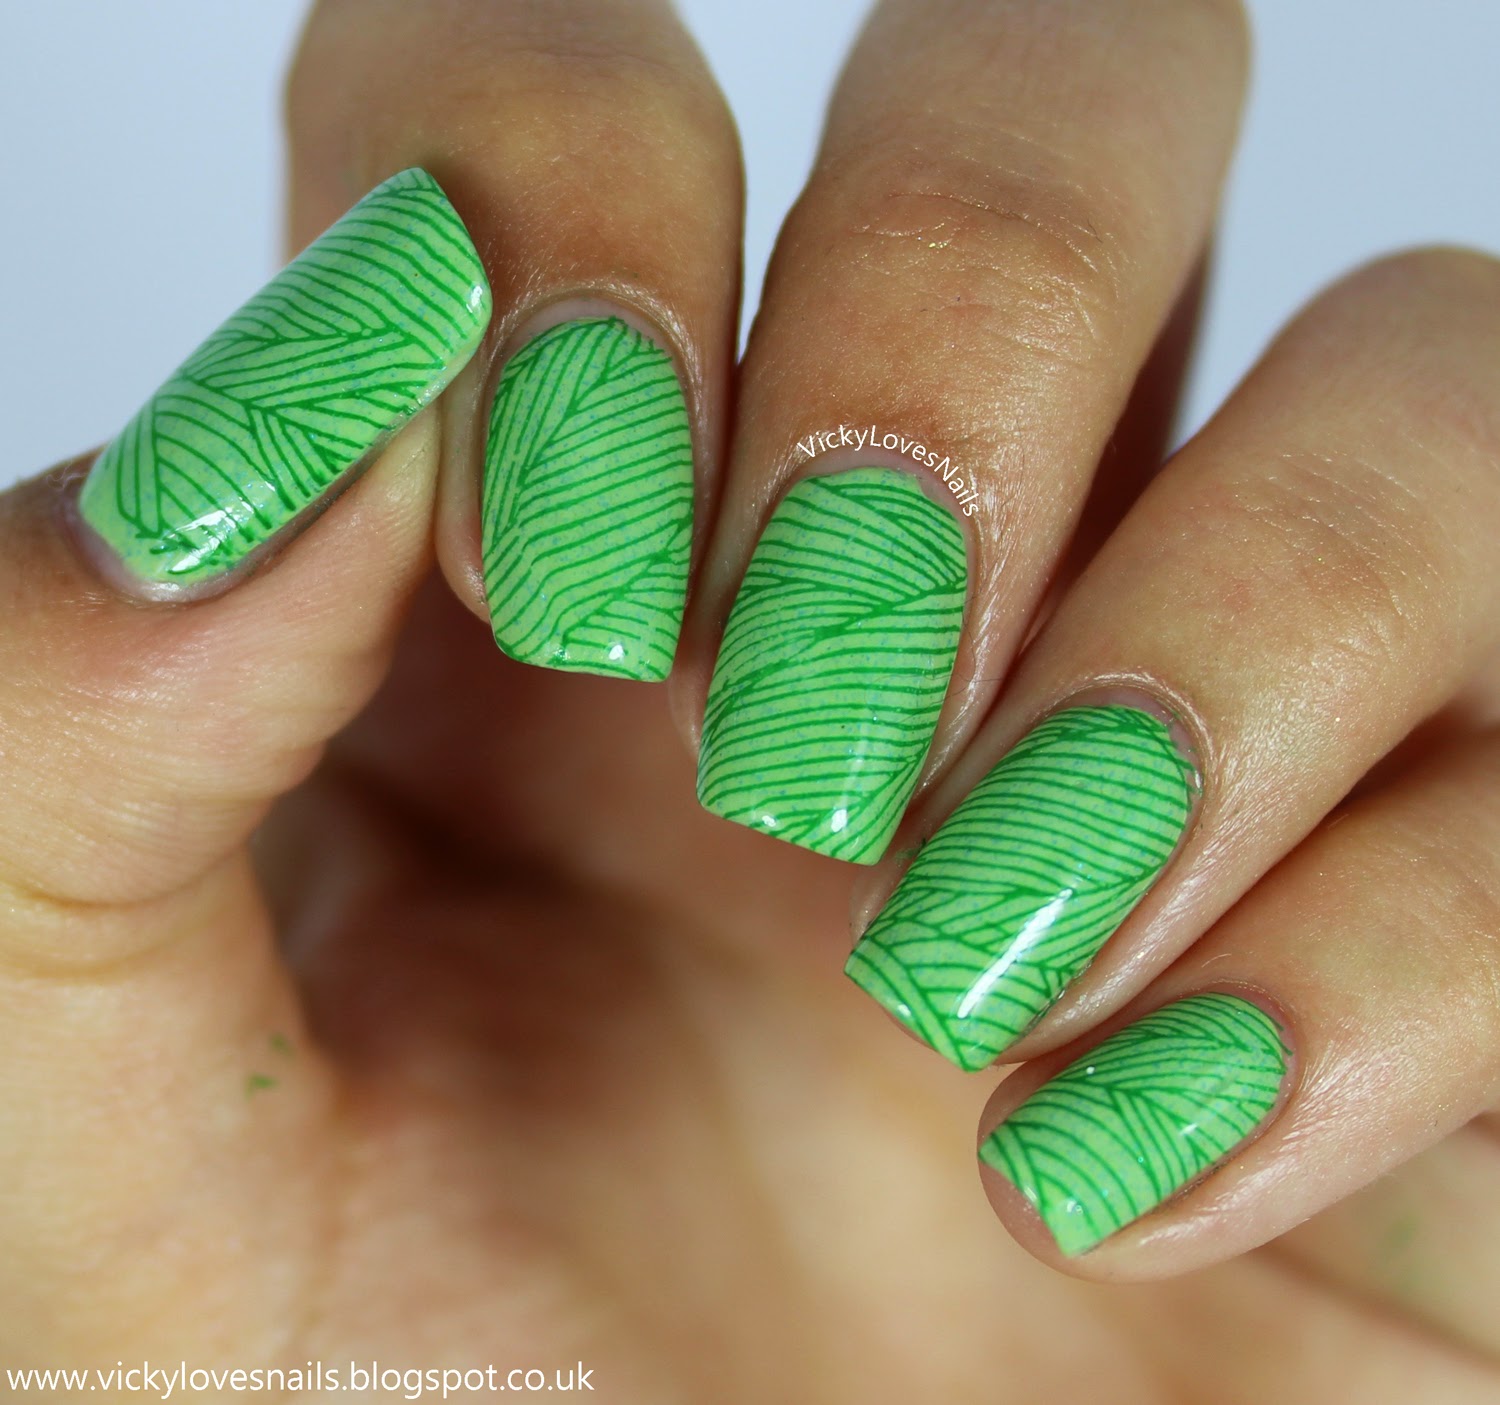 Vicky Loves Nails!: Born Pretty Store Review - Stamping Plate M89